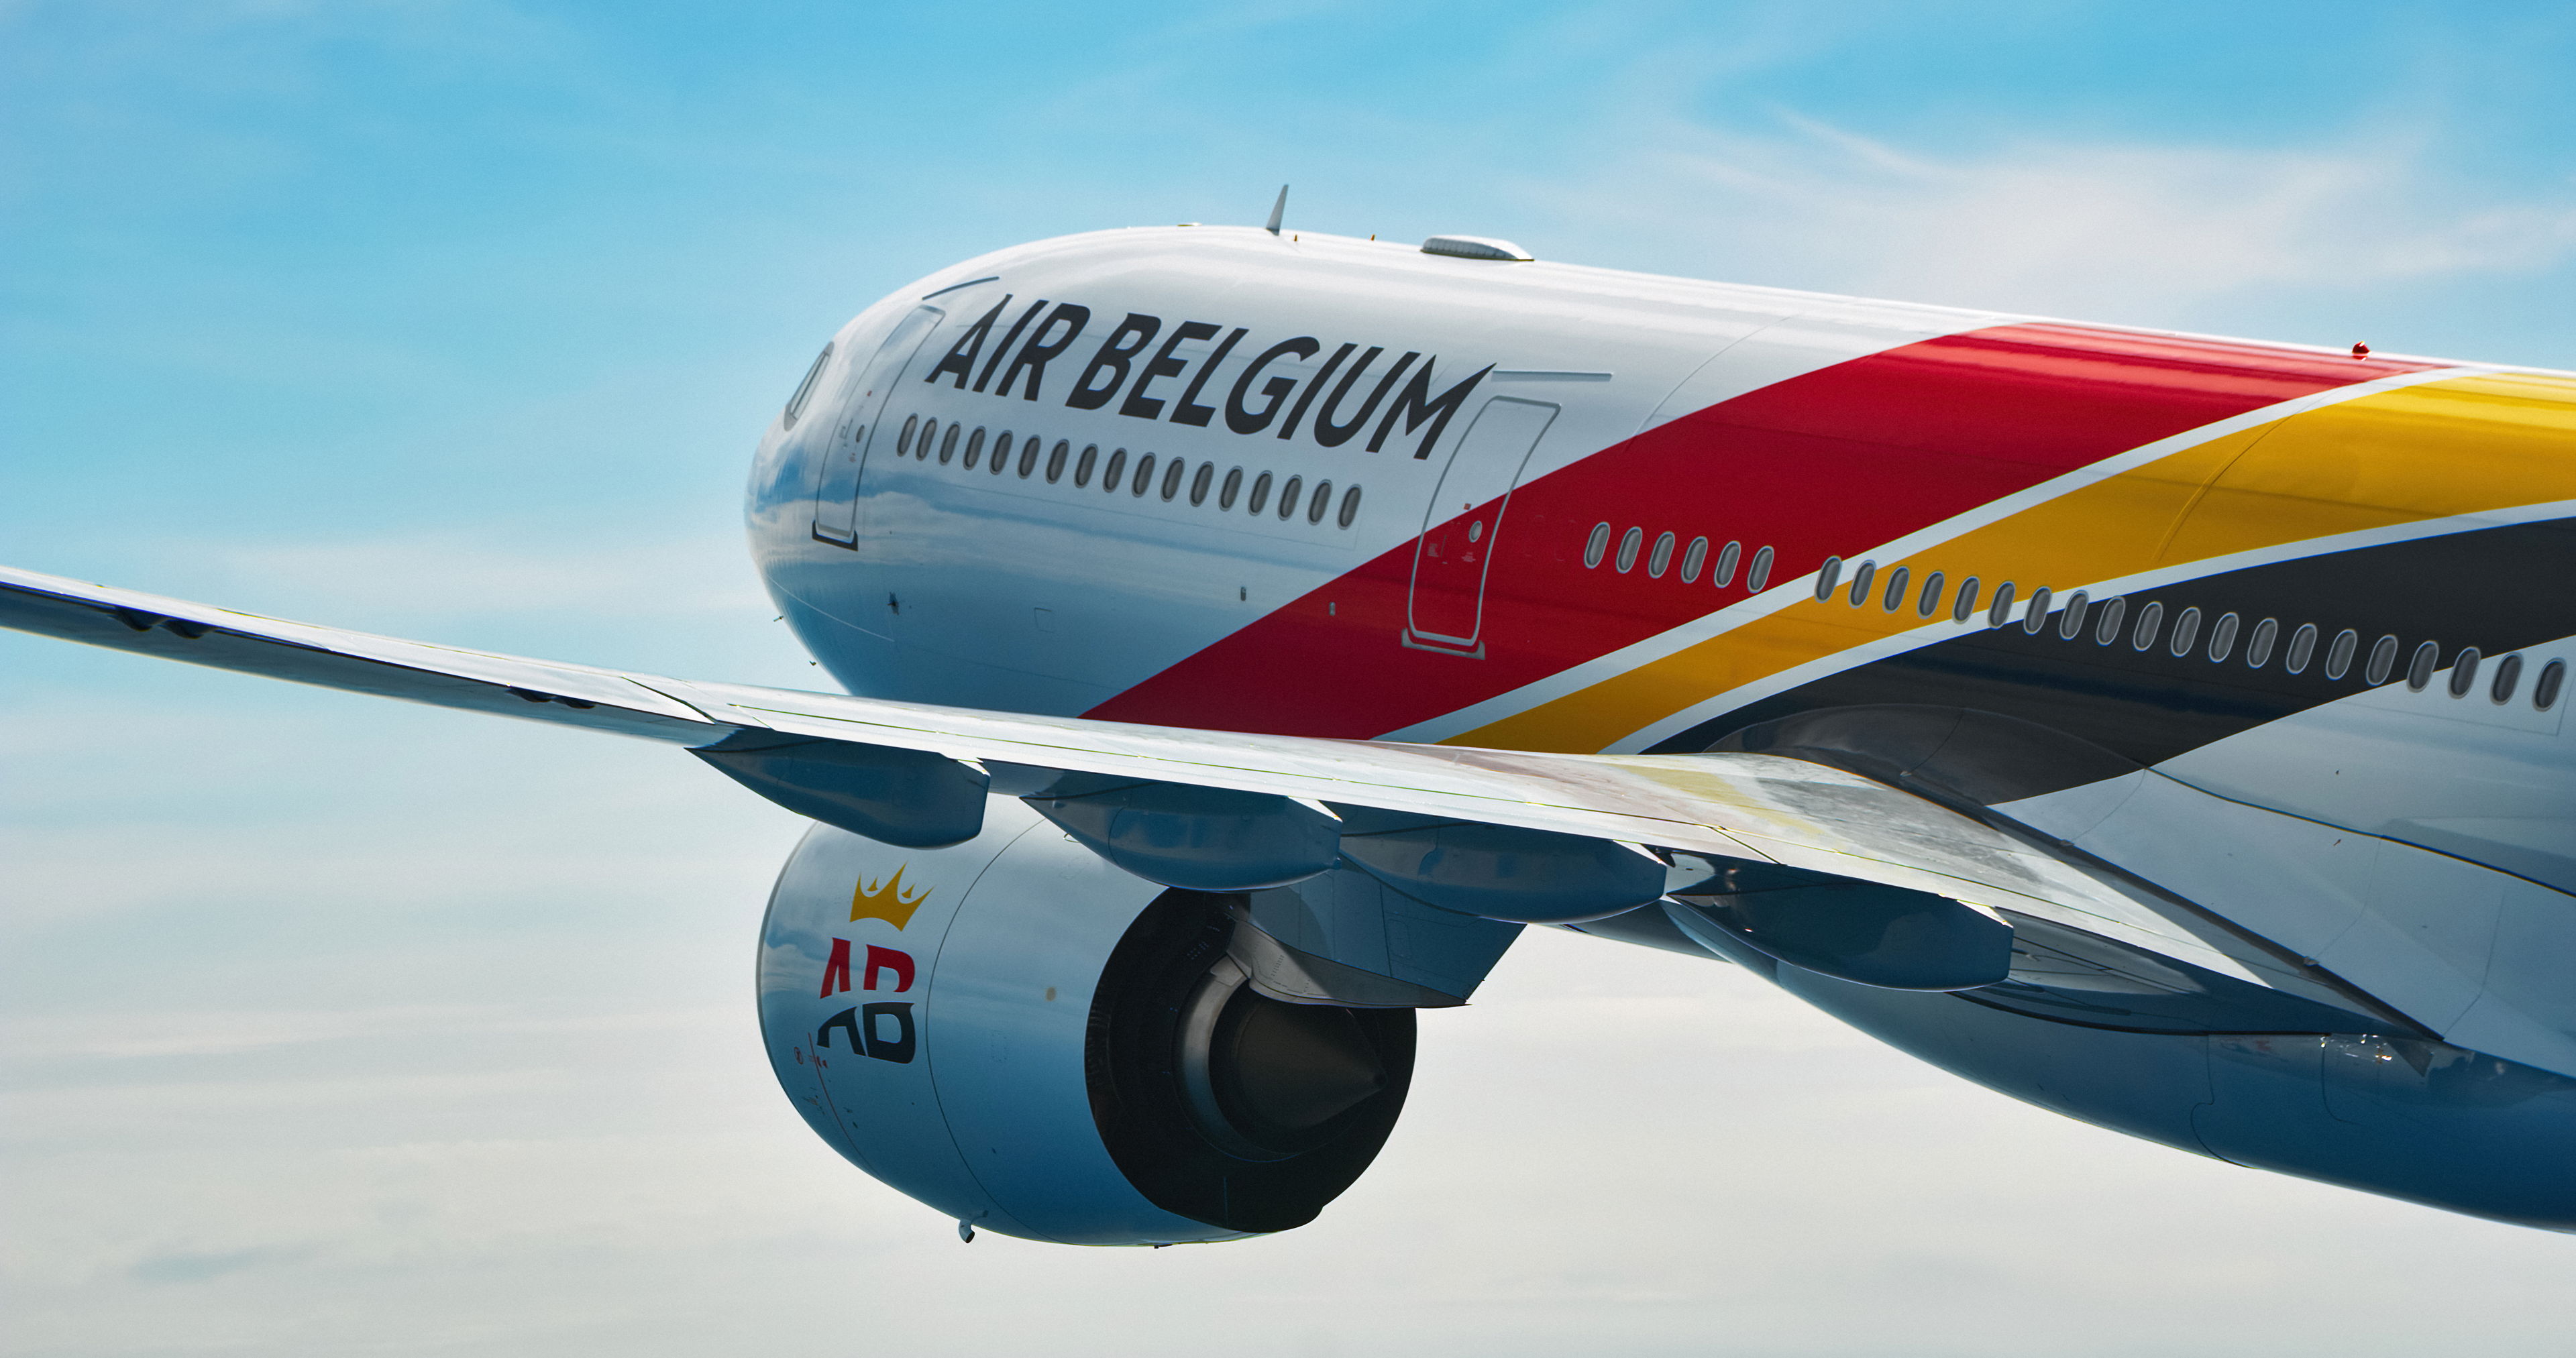 Air belgium secures new contracts for passenger and cargo services and signs new interline agreement with Air Mauritius 